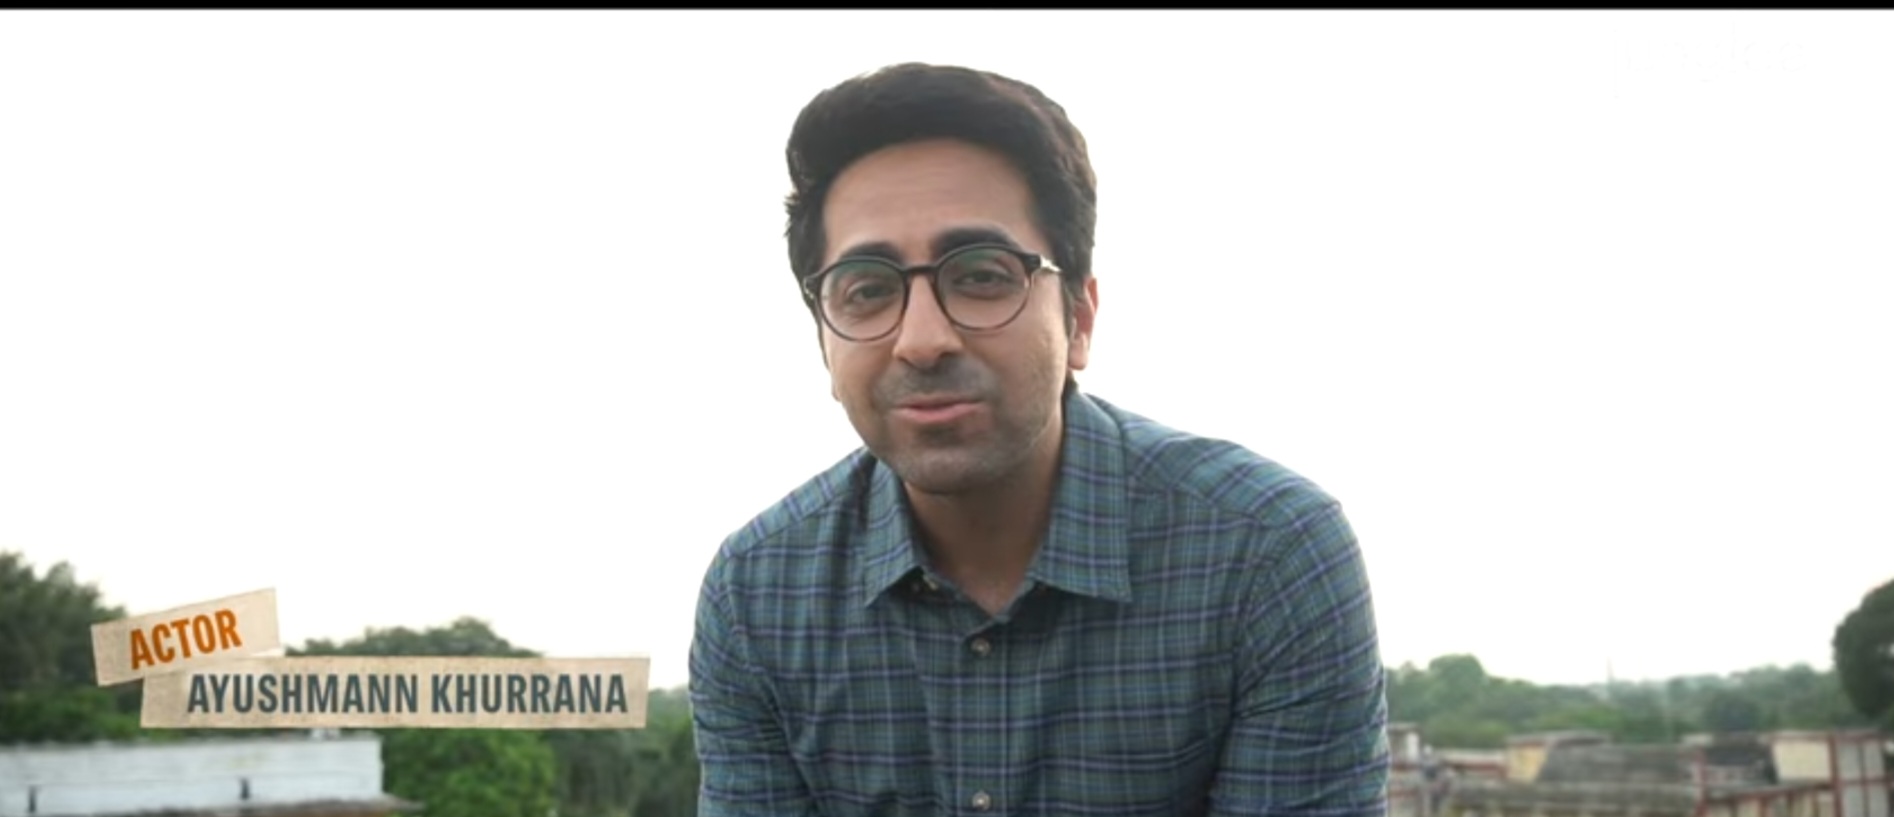 Ayushmann Khurrana plays a Male Genecology in Doctor G, says it’s a dream come true role!